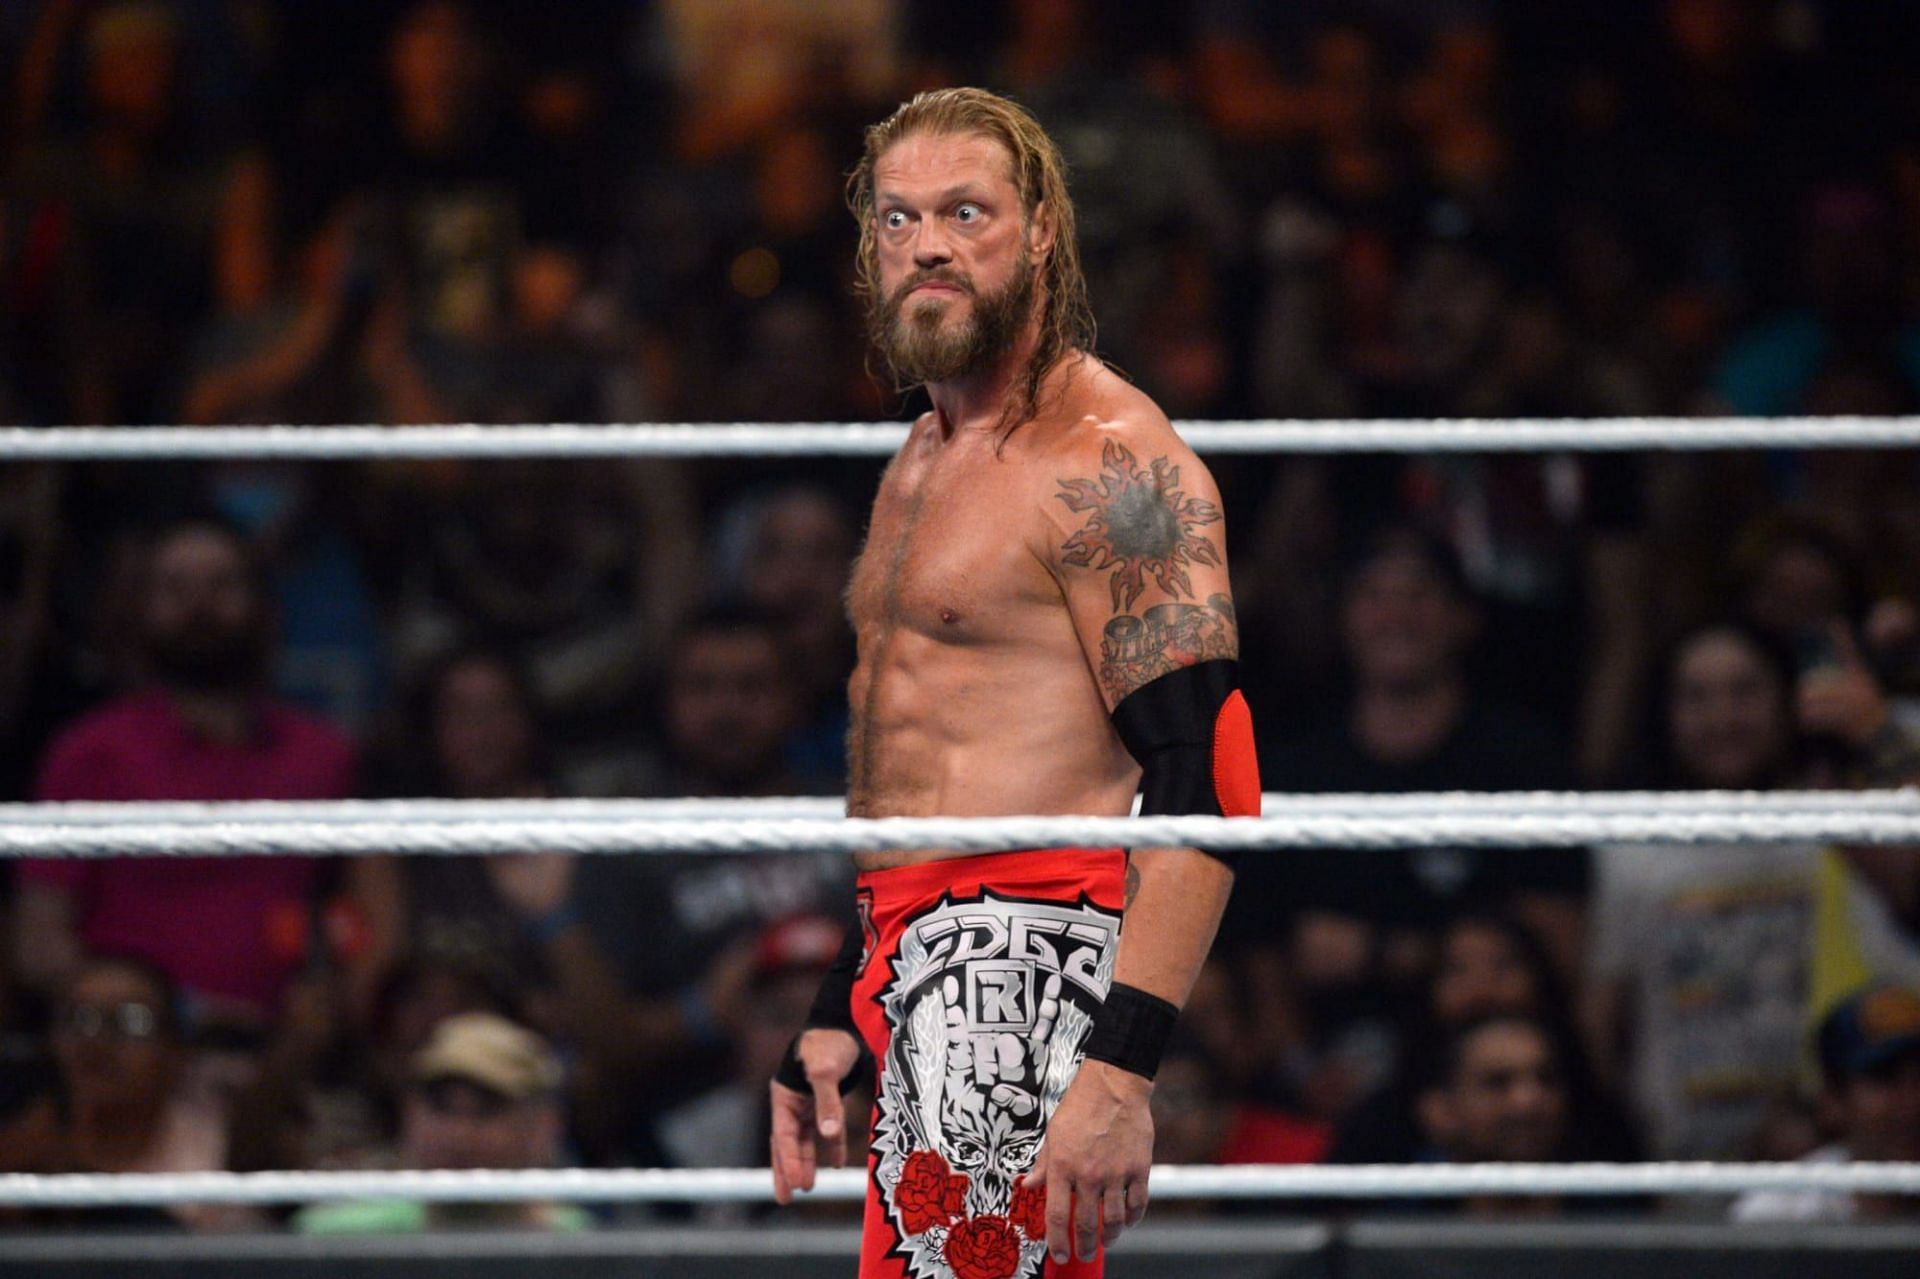 The Rated-R Superstar will be in action at WrestleMania 38